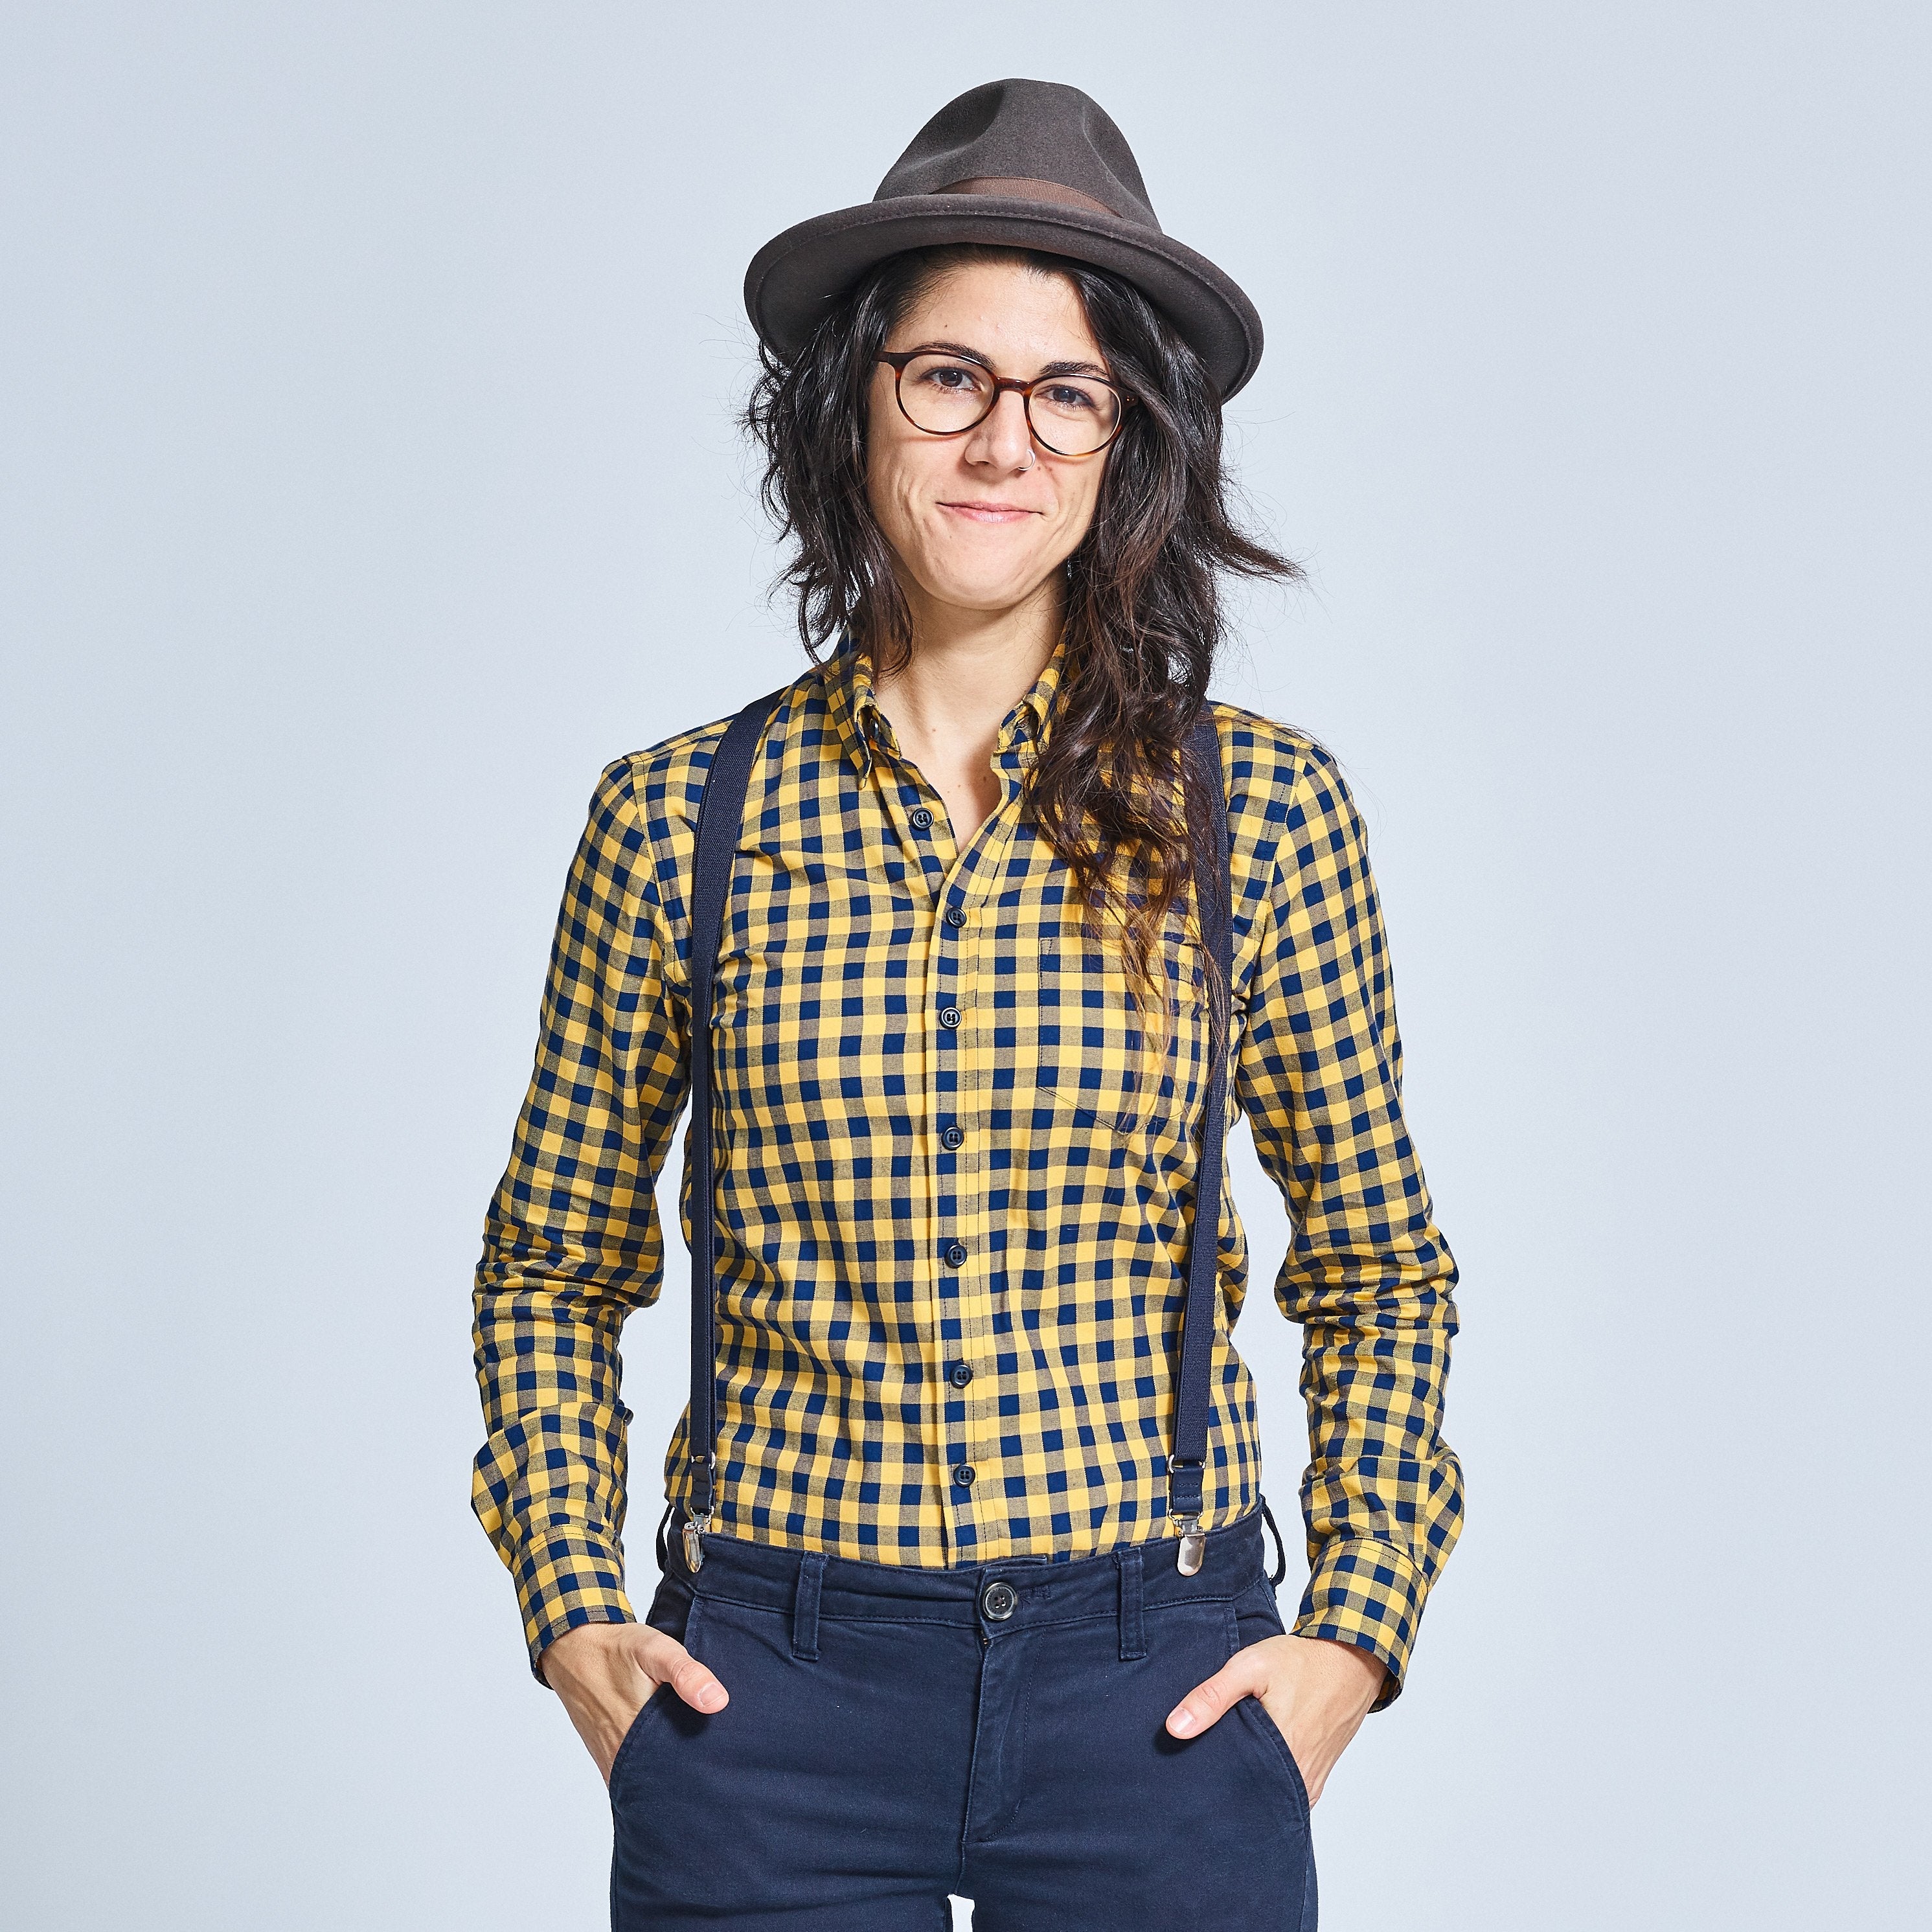 Person modeling a blue and yellow buffalo check androgynous shirt